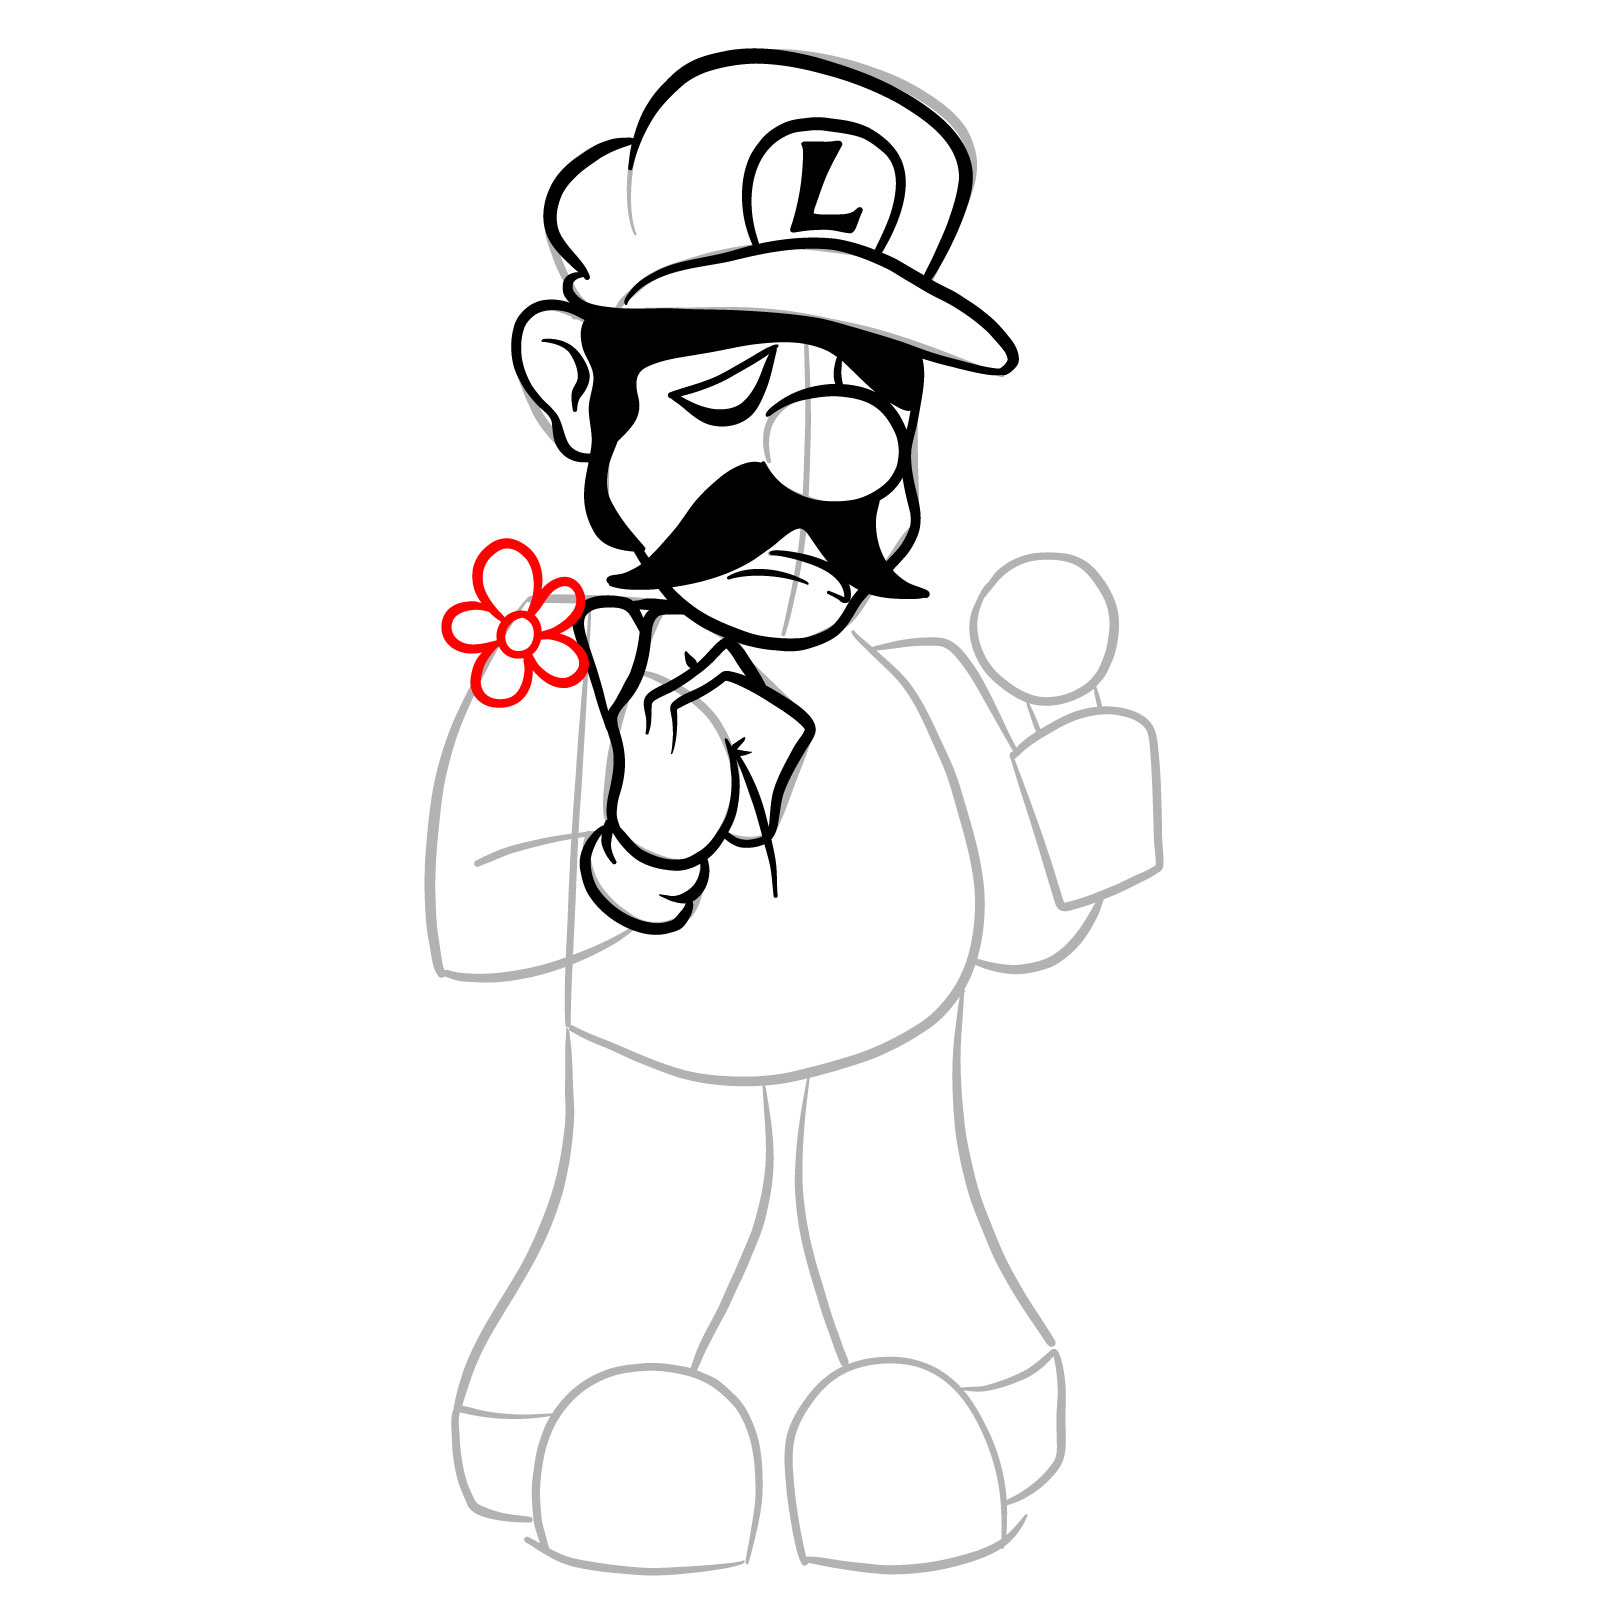 How to draw Beta Luigi from FNF - step 18